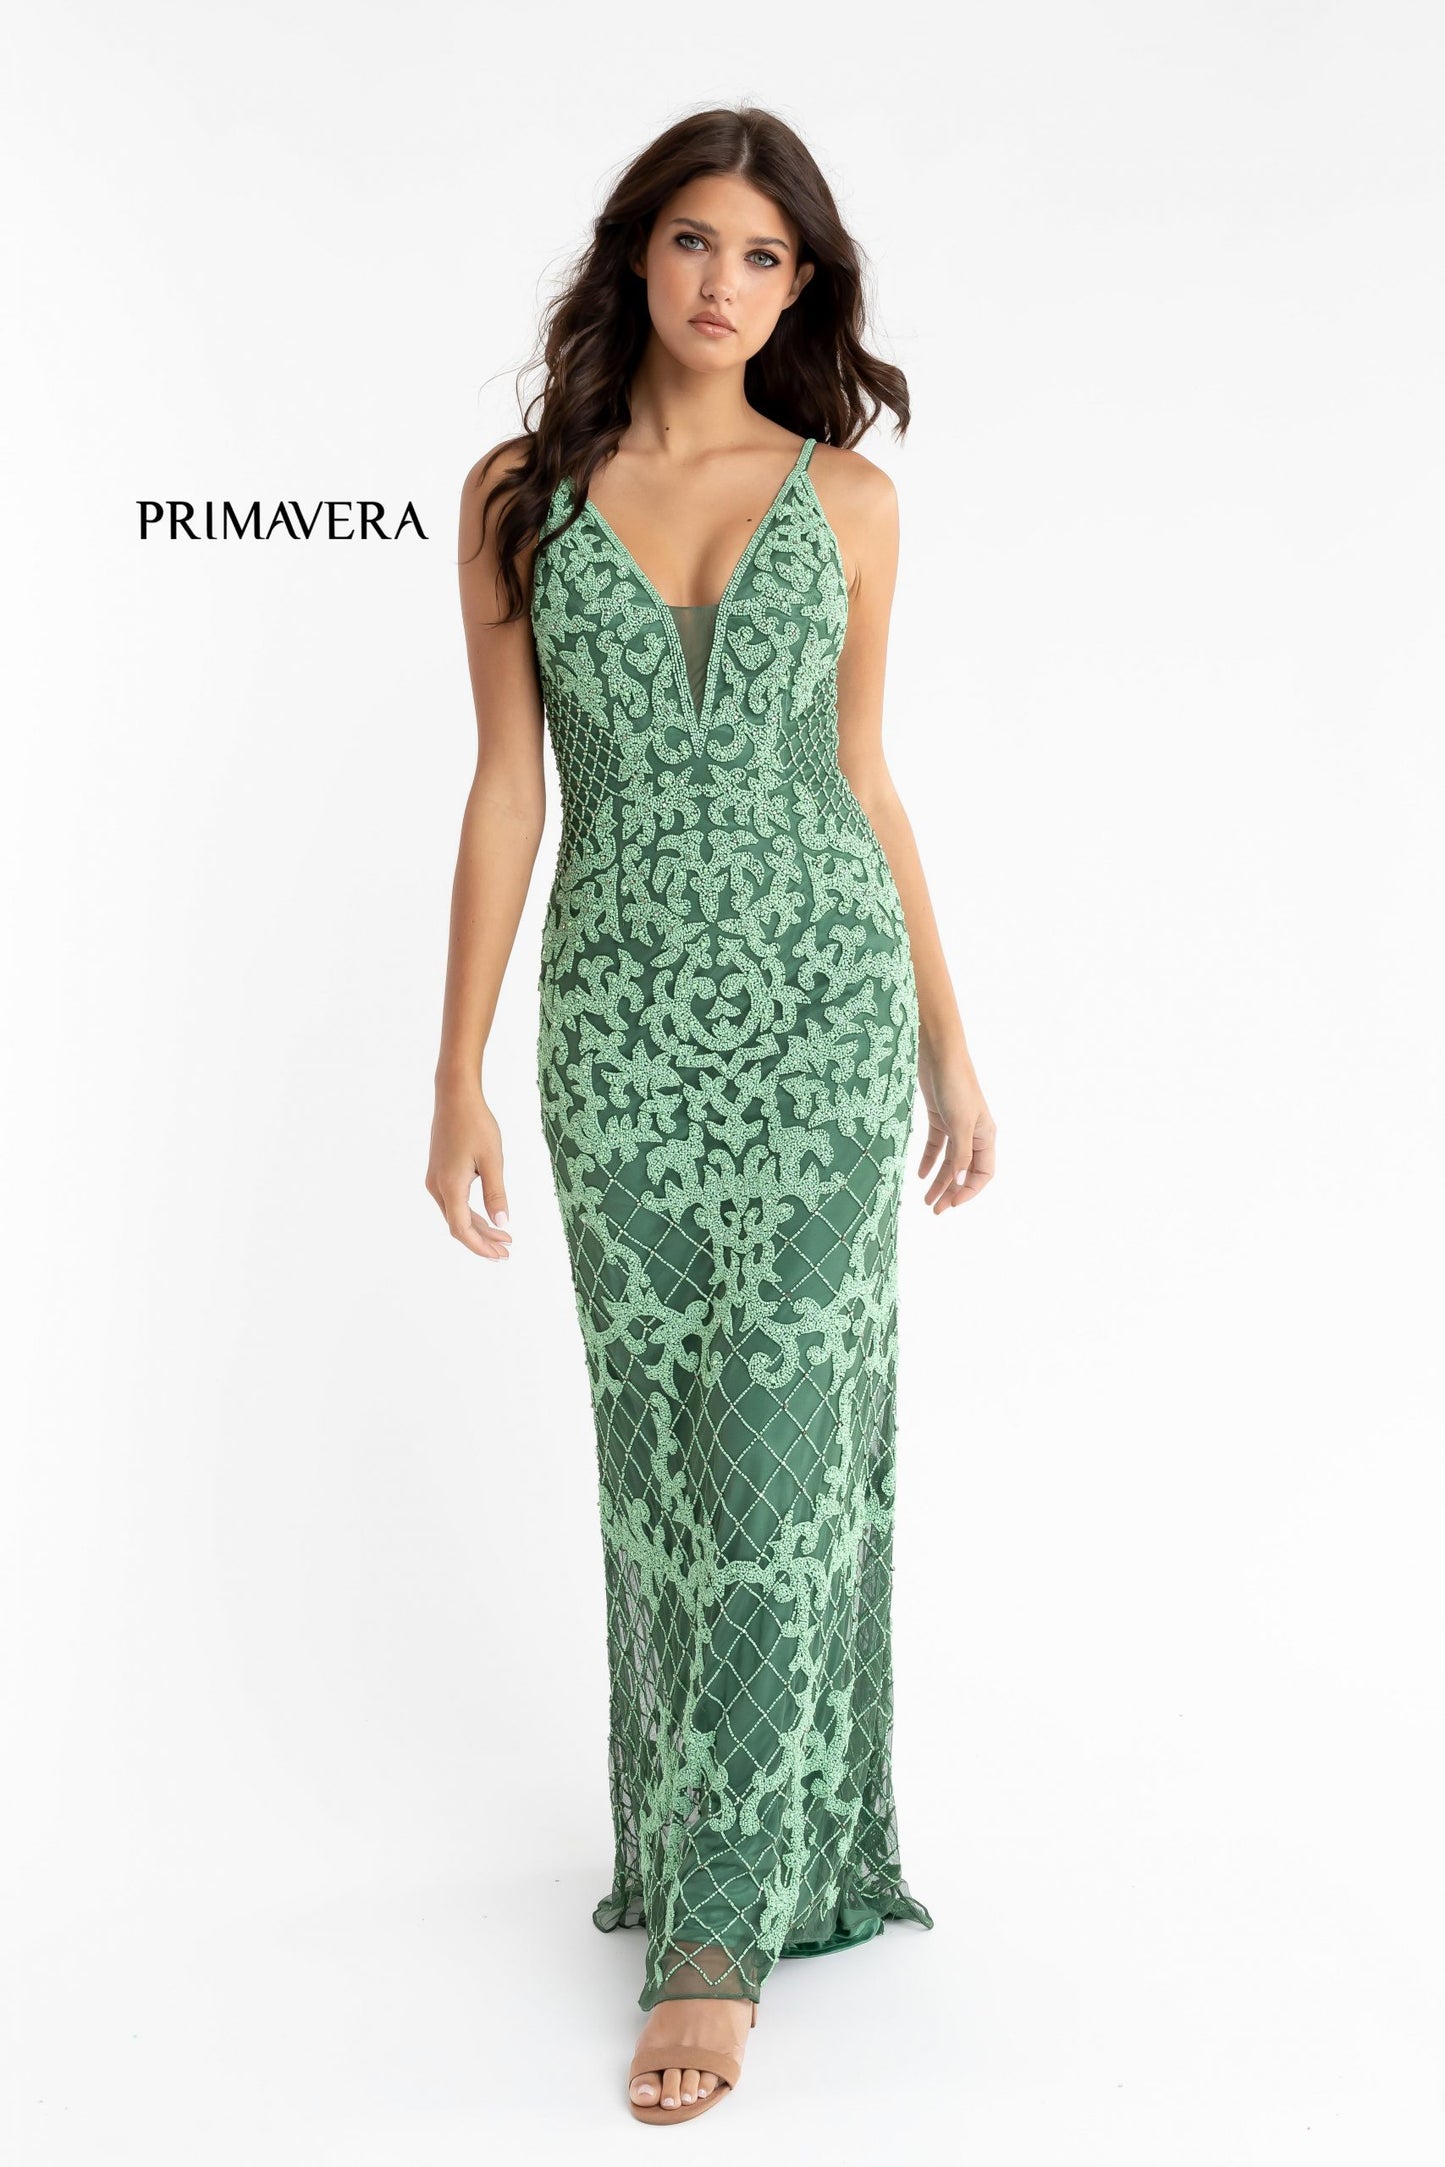 Primavera Couture 3433 is a long fully hand beaded Prom Dress, Pageant Gown, Wedding Dress & Formal Evening Wear gown. The Prom Dress has a plunging neckline with mesh panel and a long fully beaded, embellished straight skirt. It is perfect for a pageant gown or evening dress. 